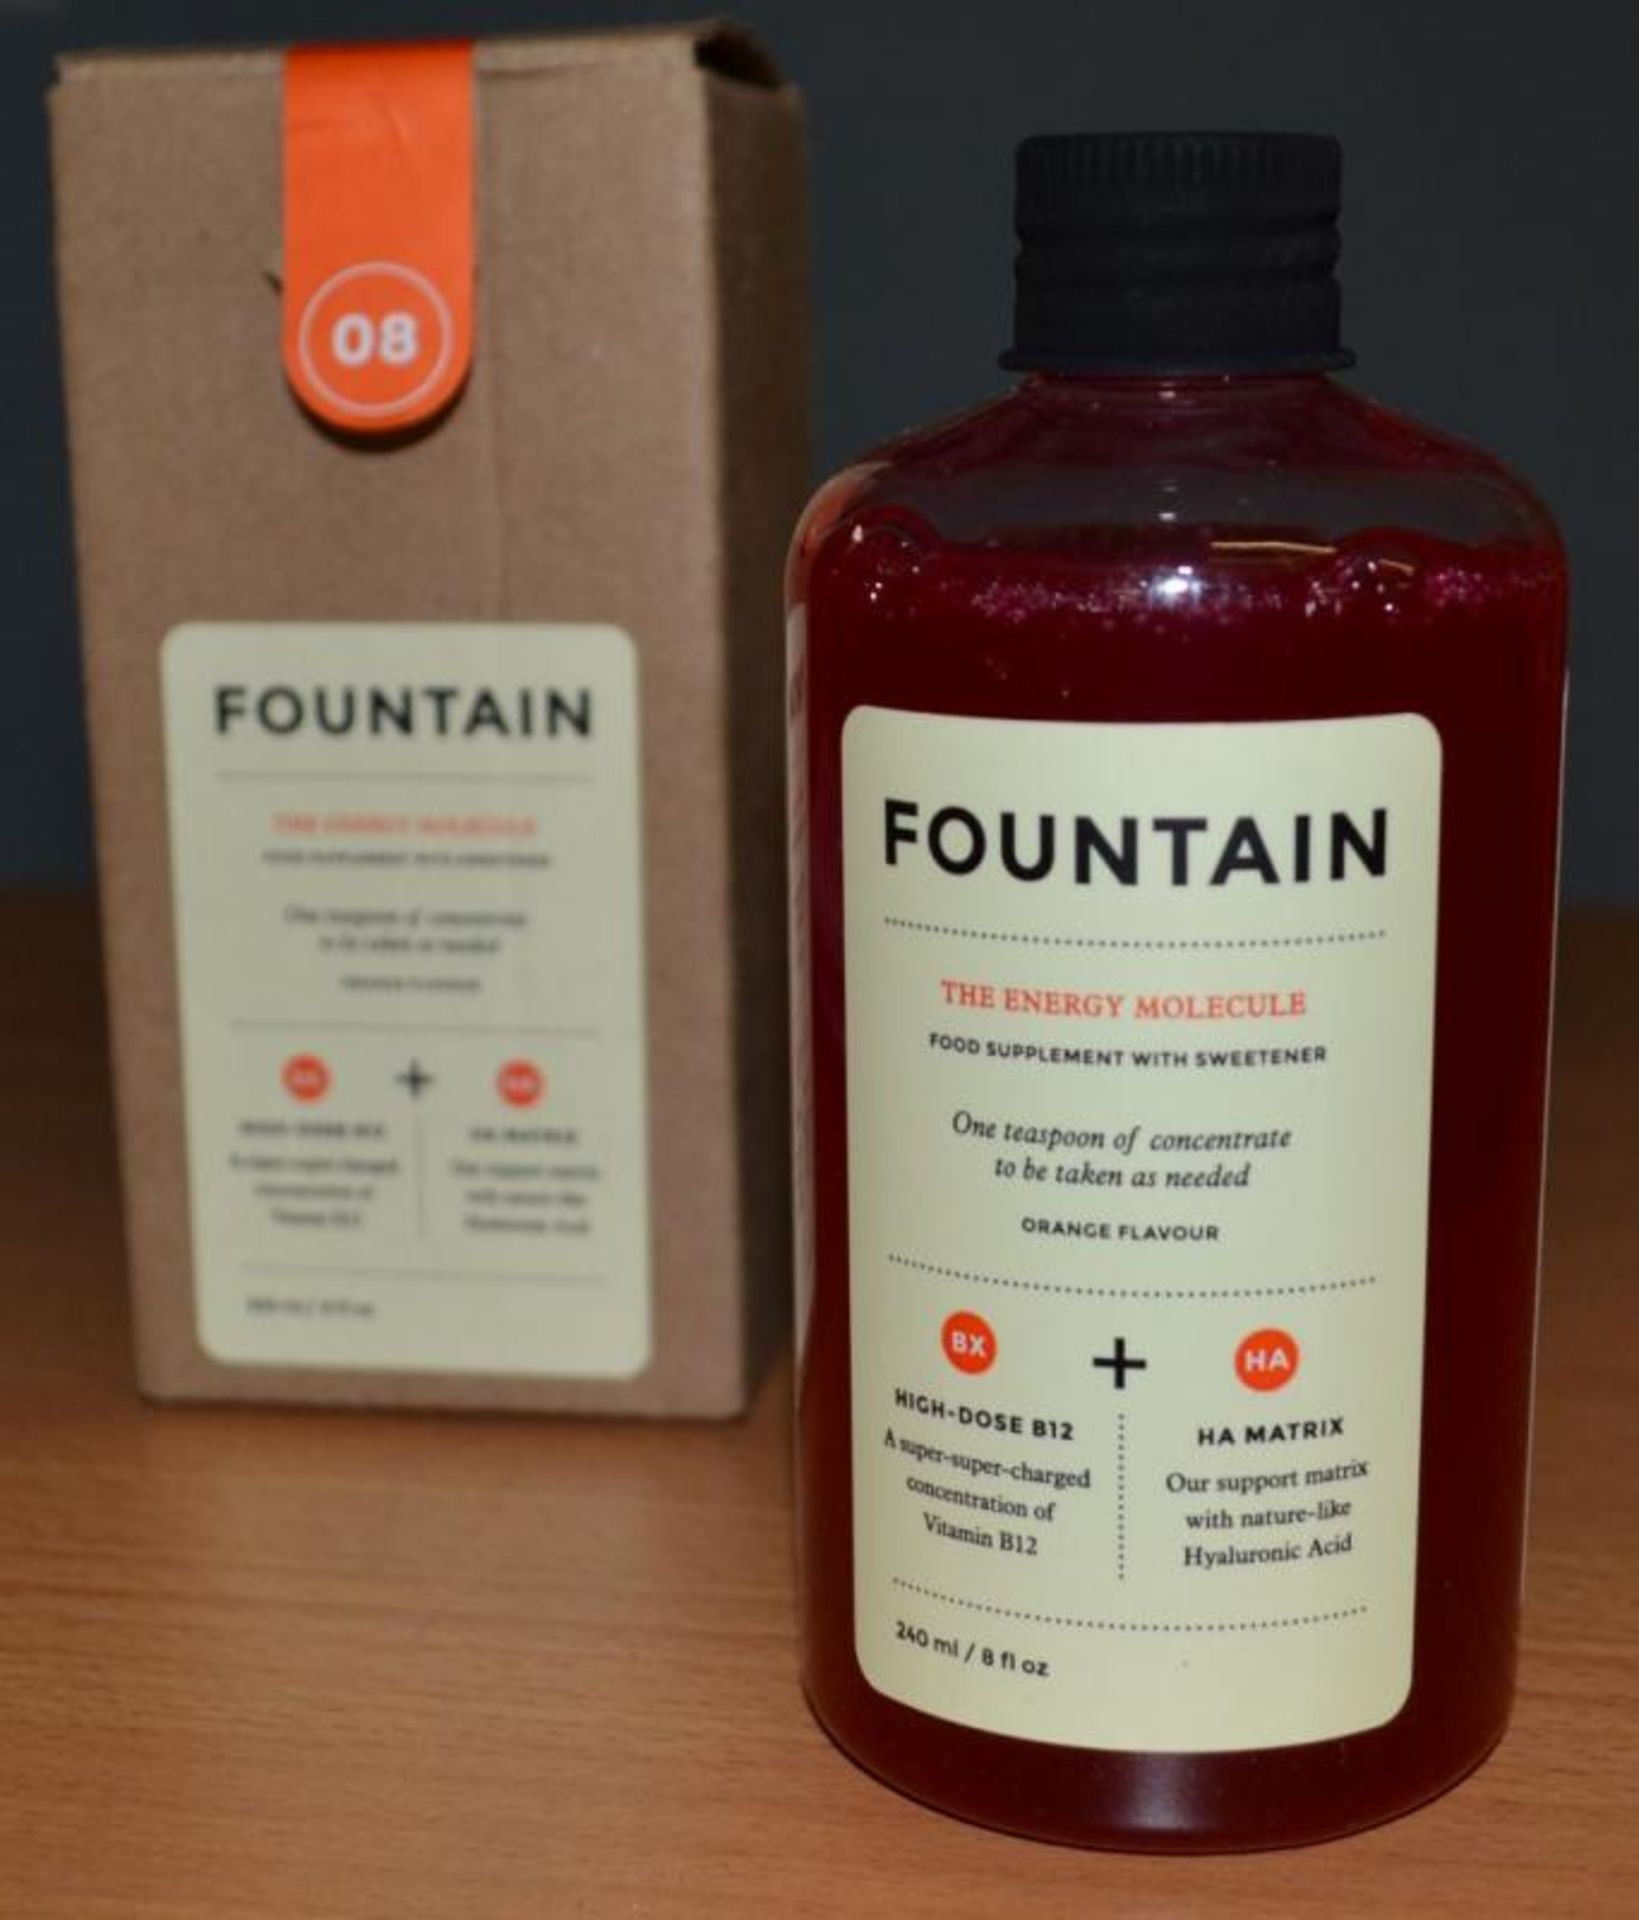 20 x 240ml Bottles of Fountain, The Energy Molecule Supplement - New & Boxed - CL185 - Ref: - Image 5 of 7